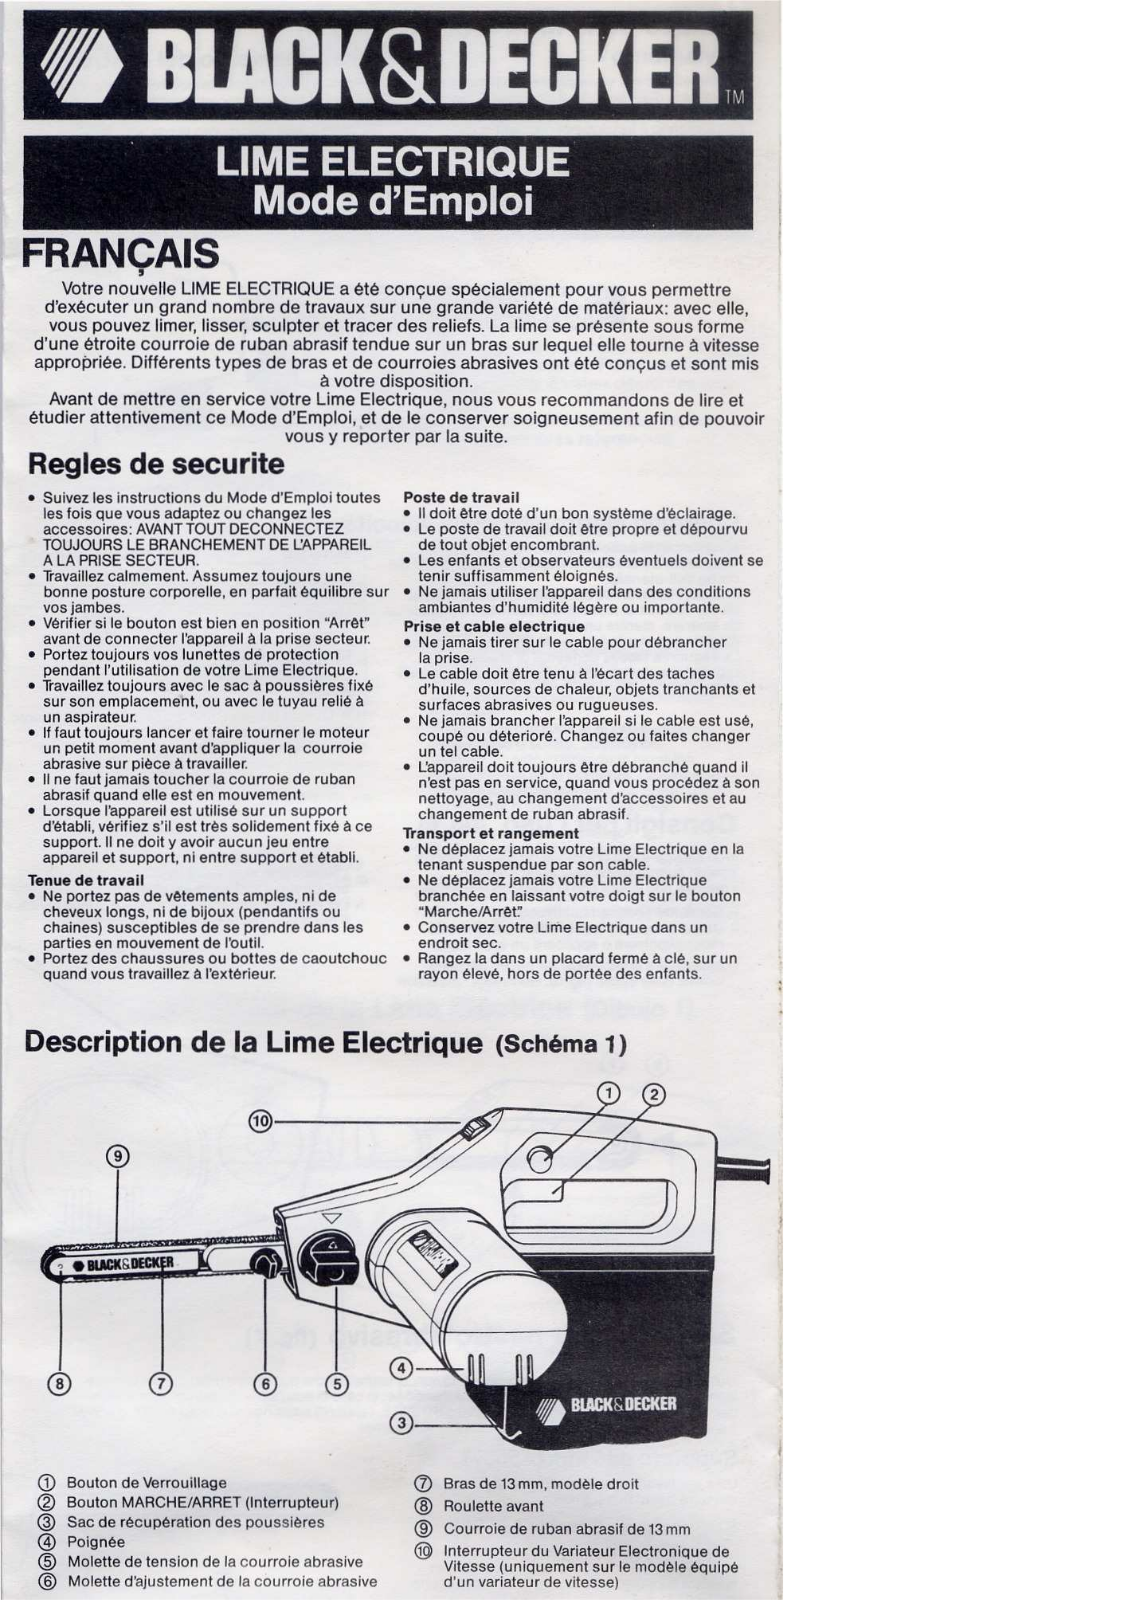 User manual Black & Decker TO1491S (English - 11 pages)